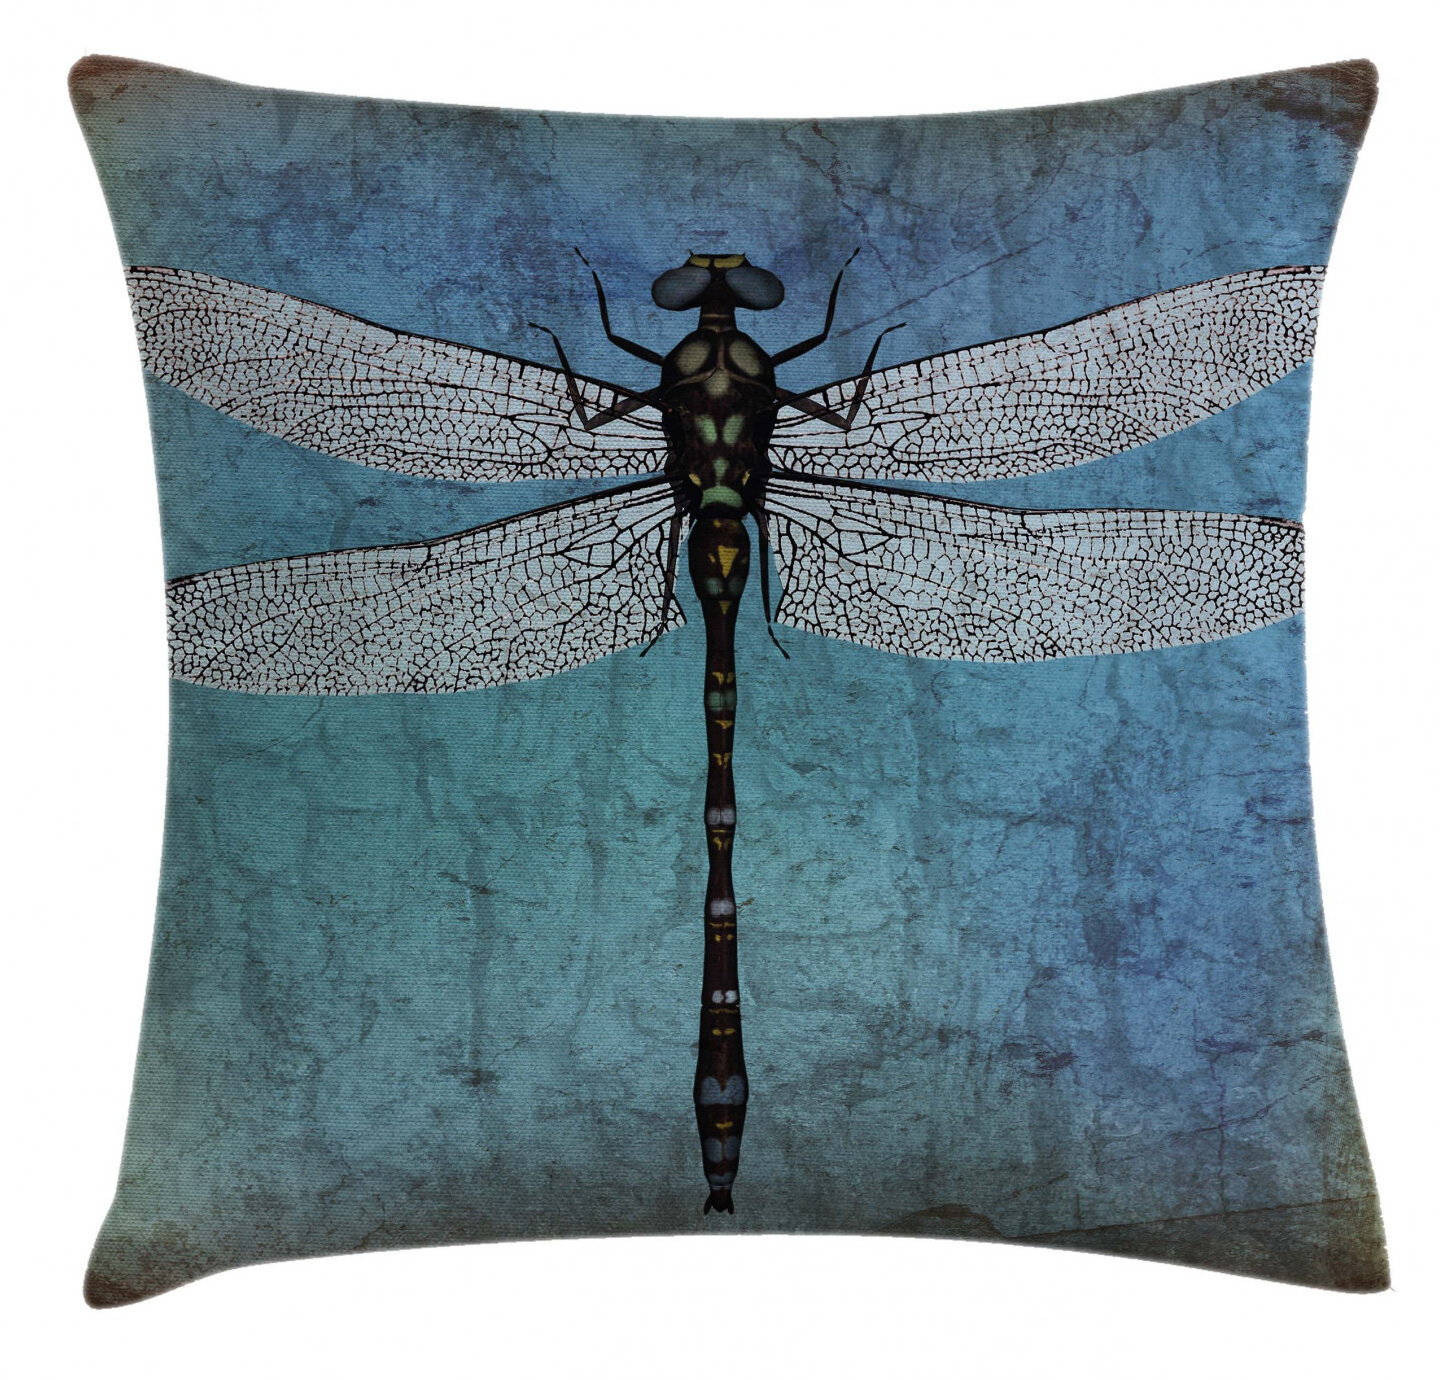 Dragonfly Life Cycle Grey Cushion Covers Pillow Cases Home Decor or Inner